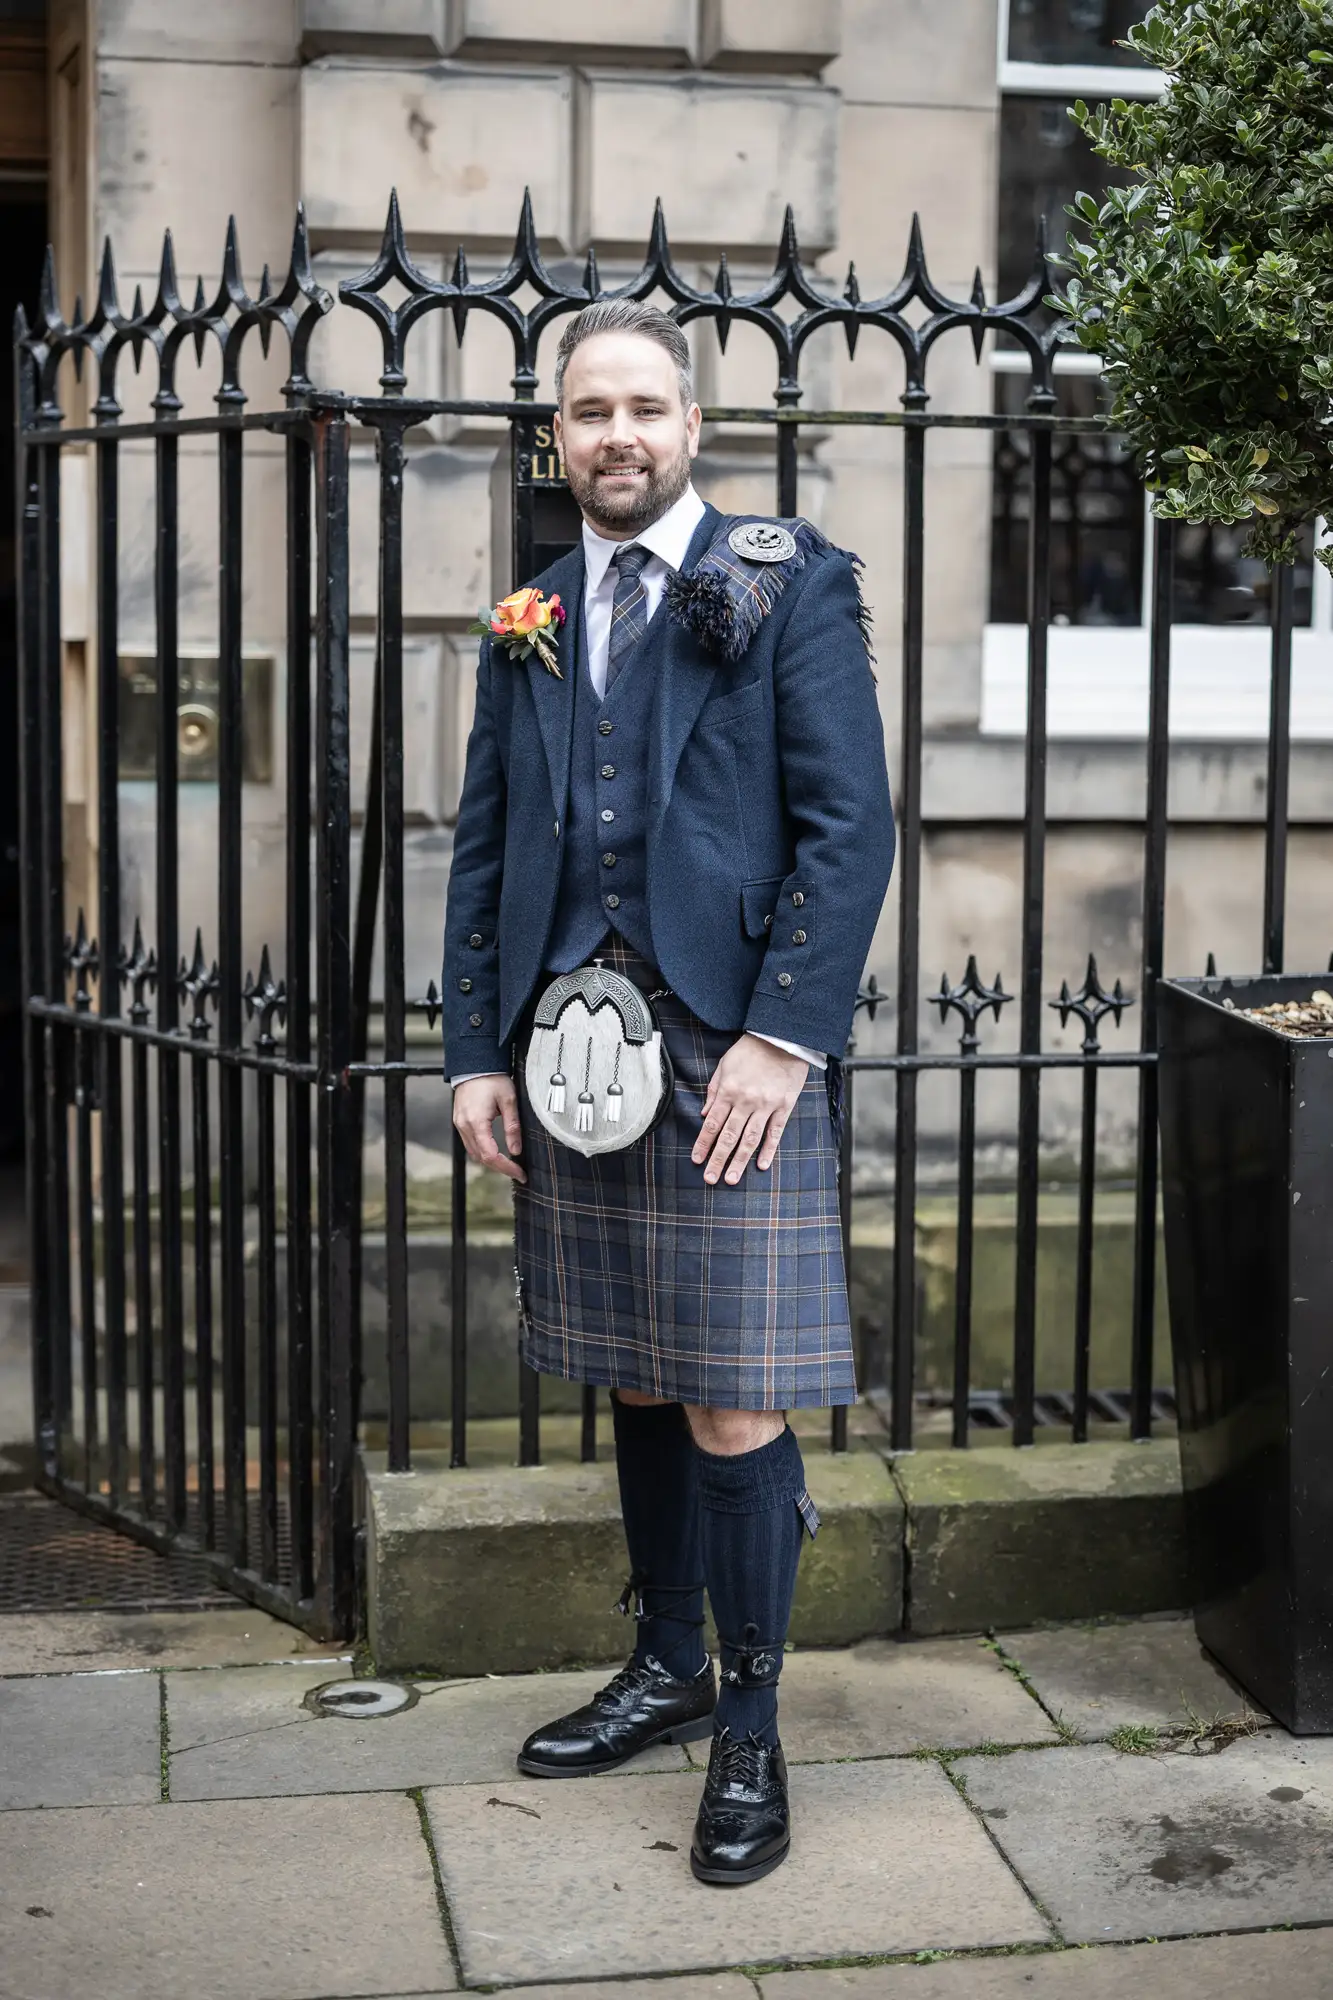 Man in traditional scottish attire, including a kilt and sporran, stands smiling by a black iron fence with a boutonniere on his jacket.